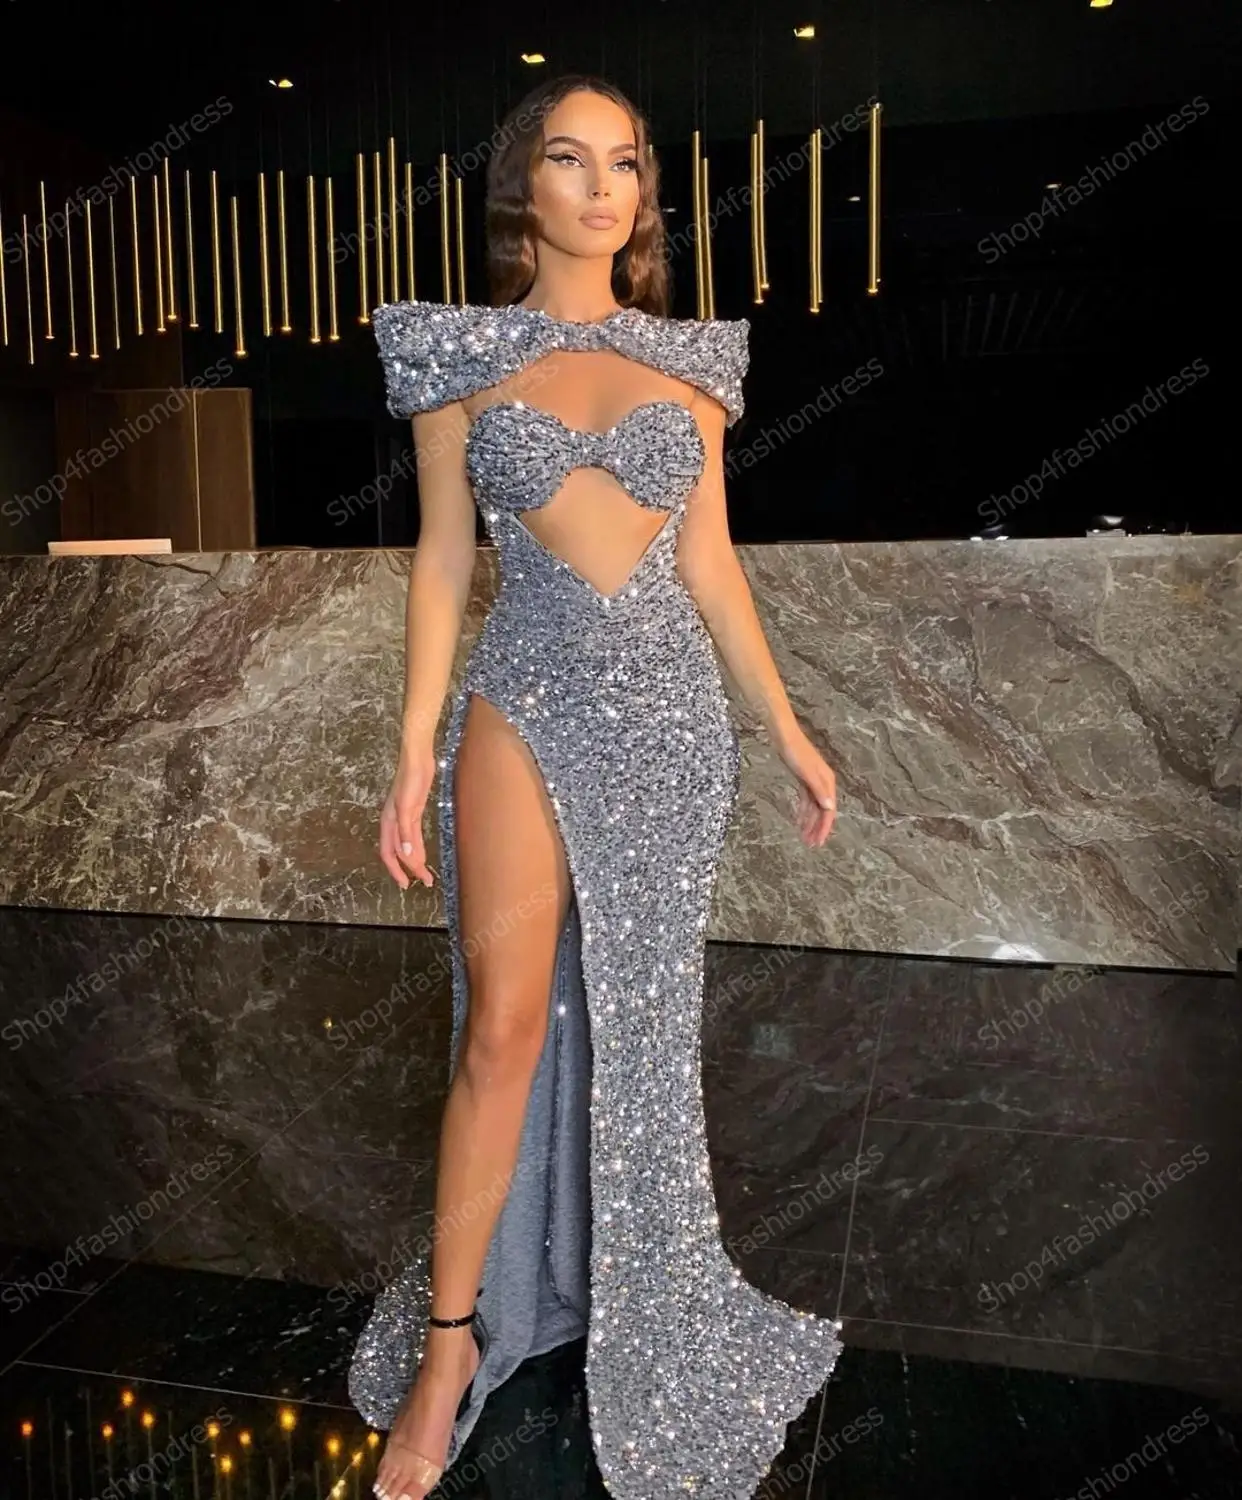 Glitter Silver Sequins High Neck Prom ...